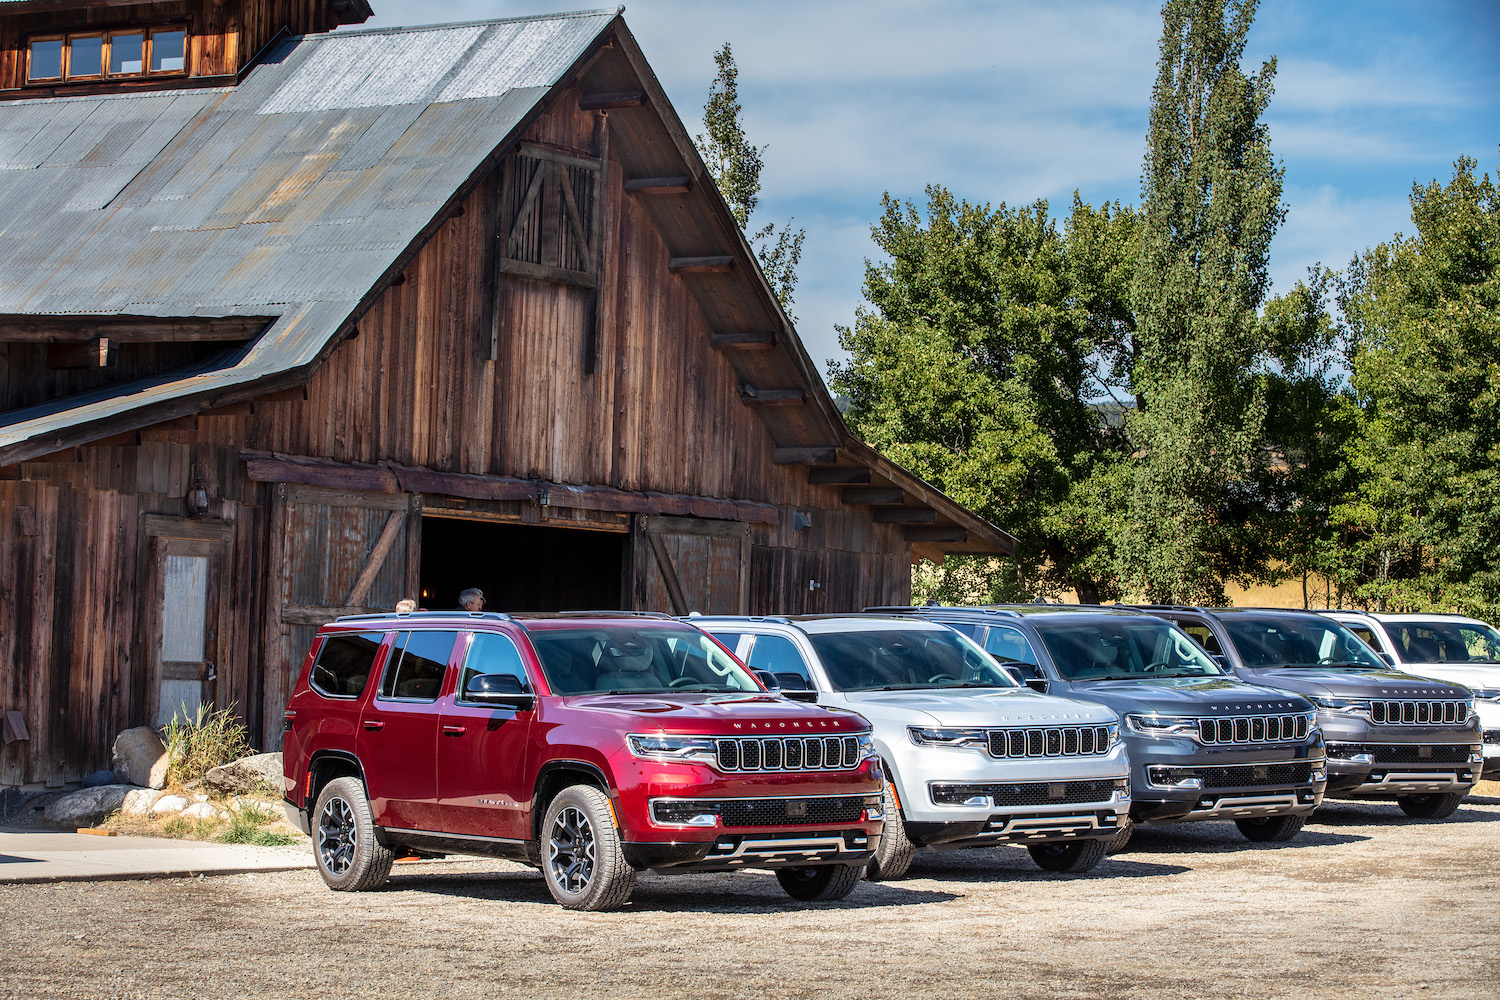 Lineup of Wagoneer luxury SUVs that are getting a price cut from Jeep.